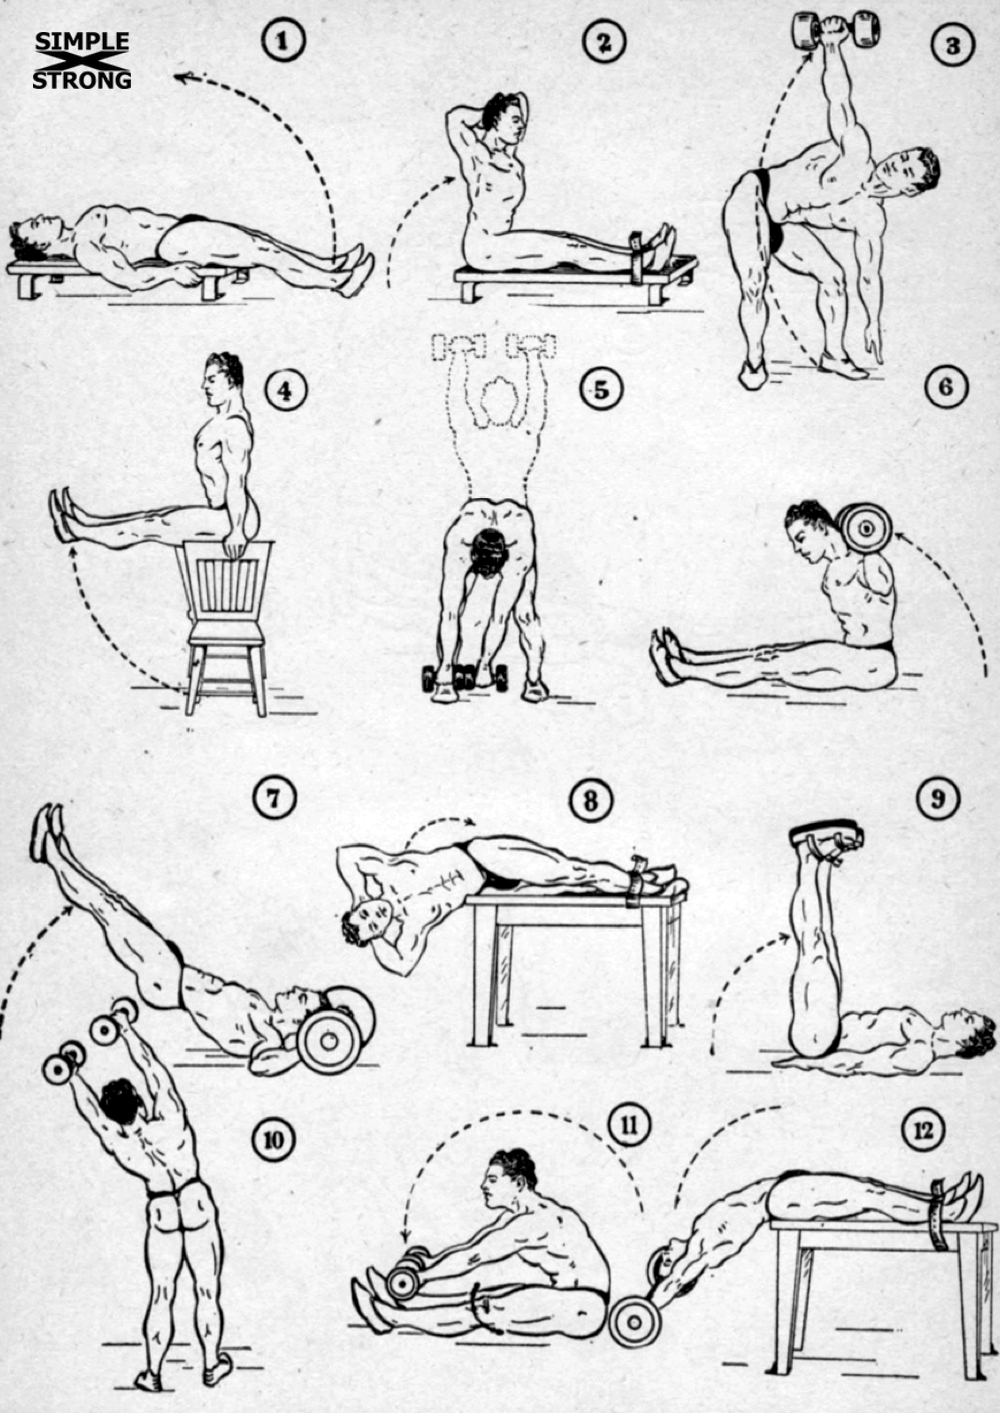 Orlick/Weider: Abdominal Exercises for Strength and Power (1944)